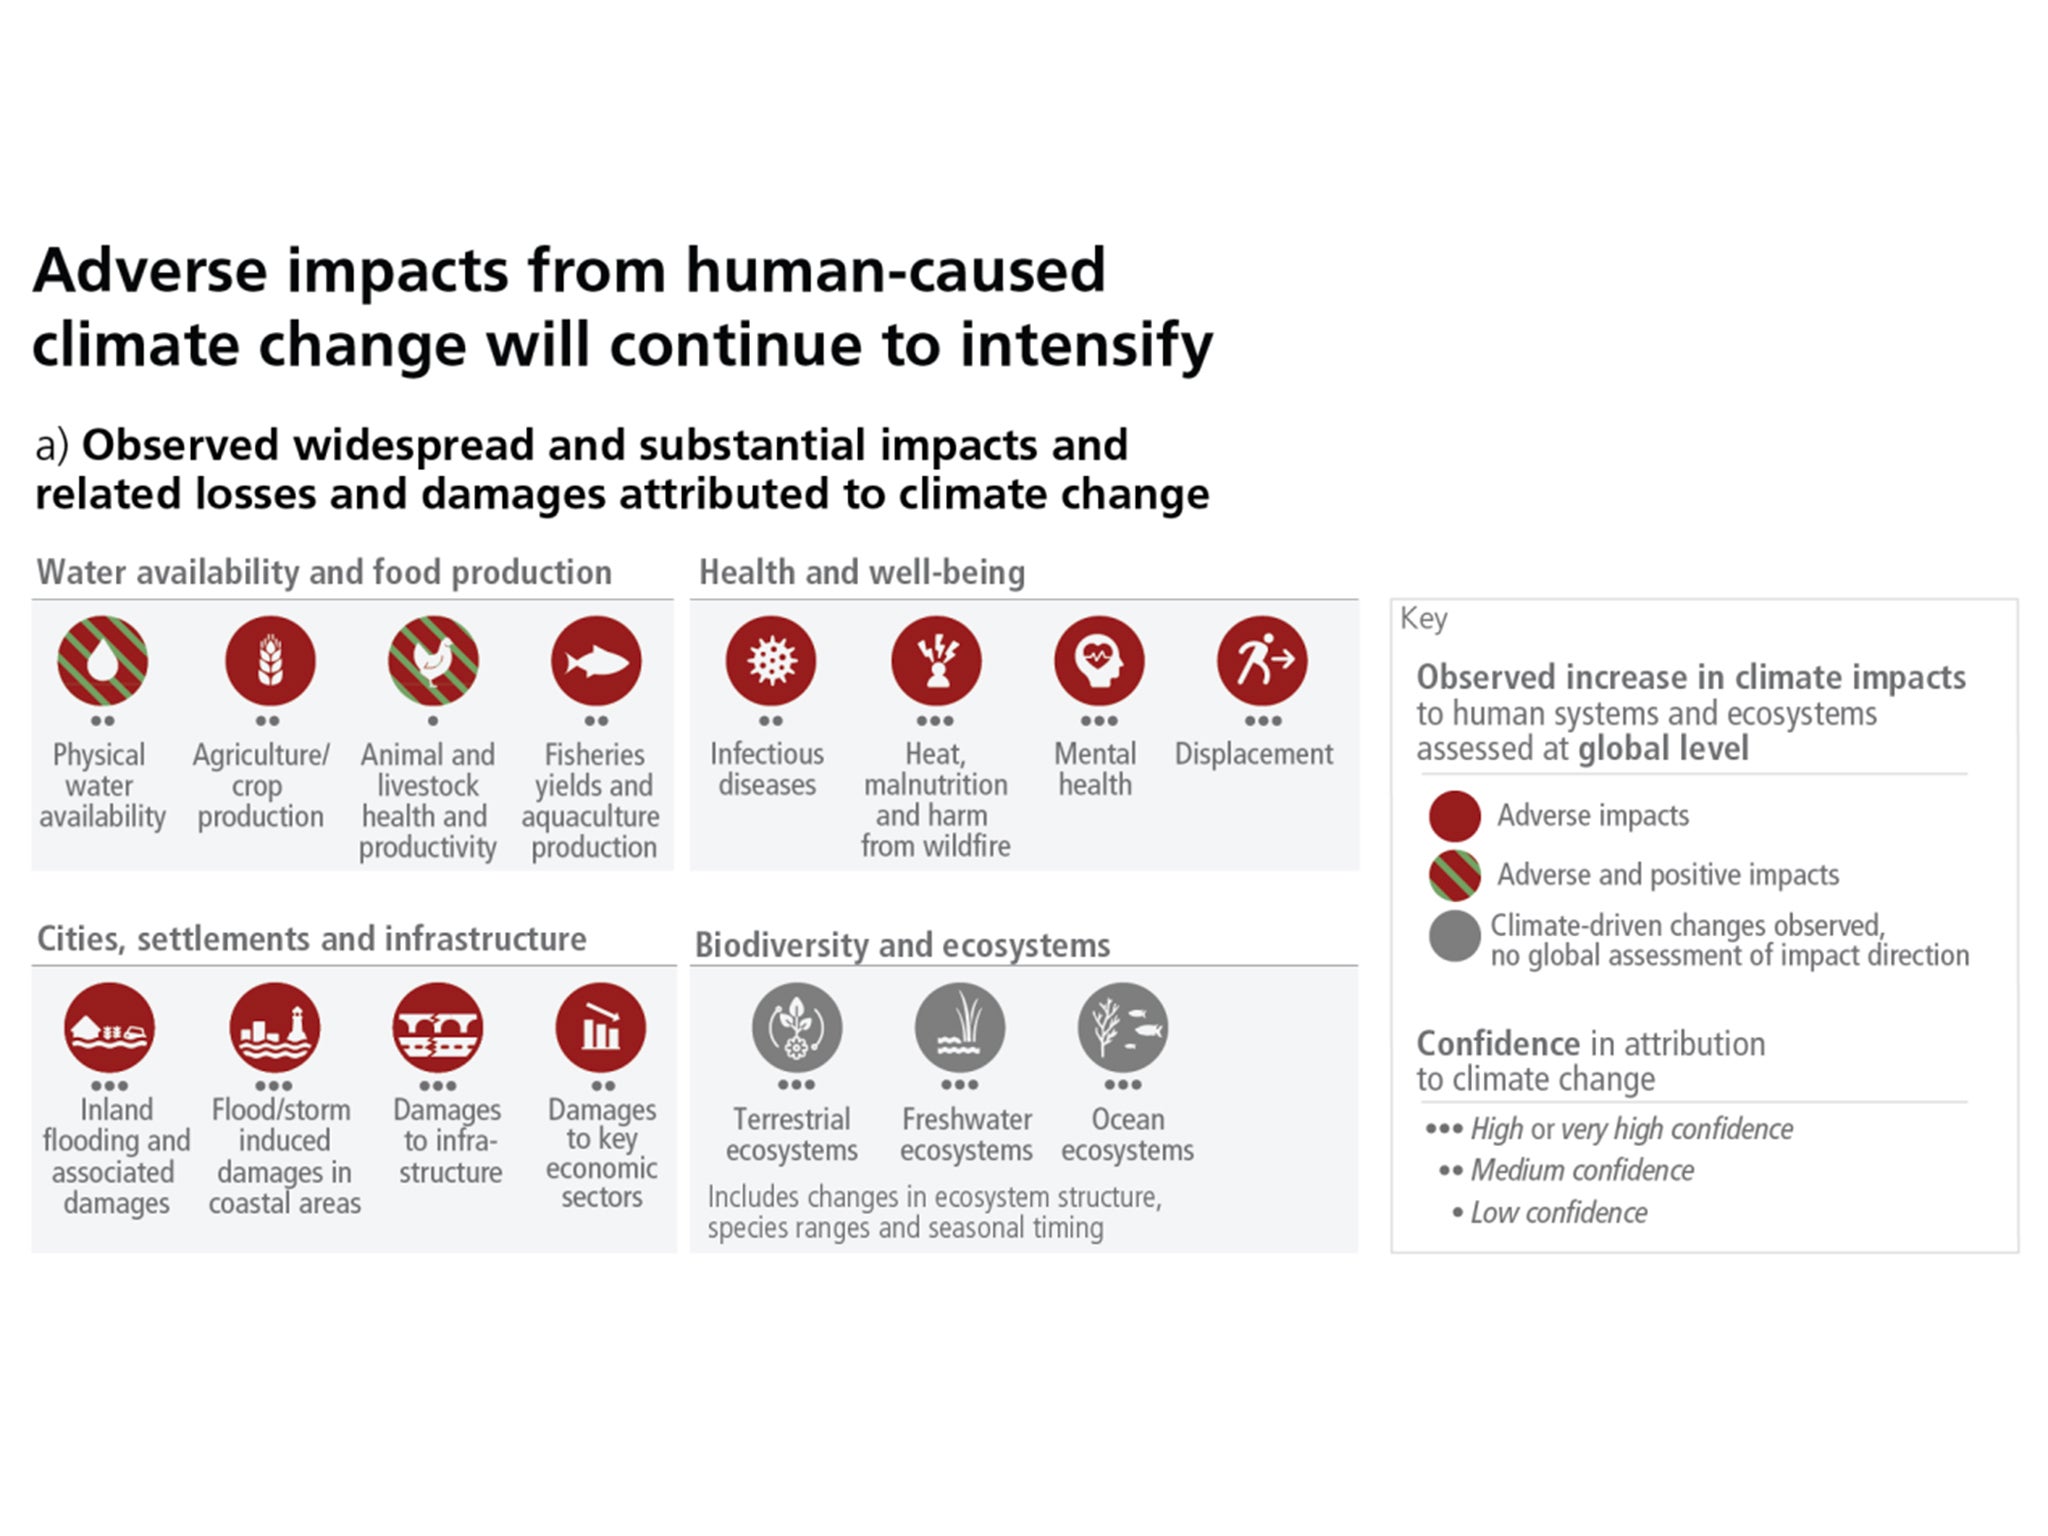 The climate impacts on human needs